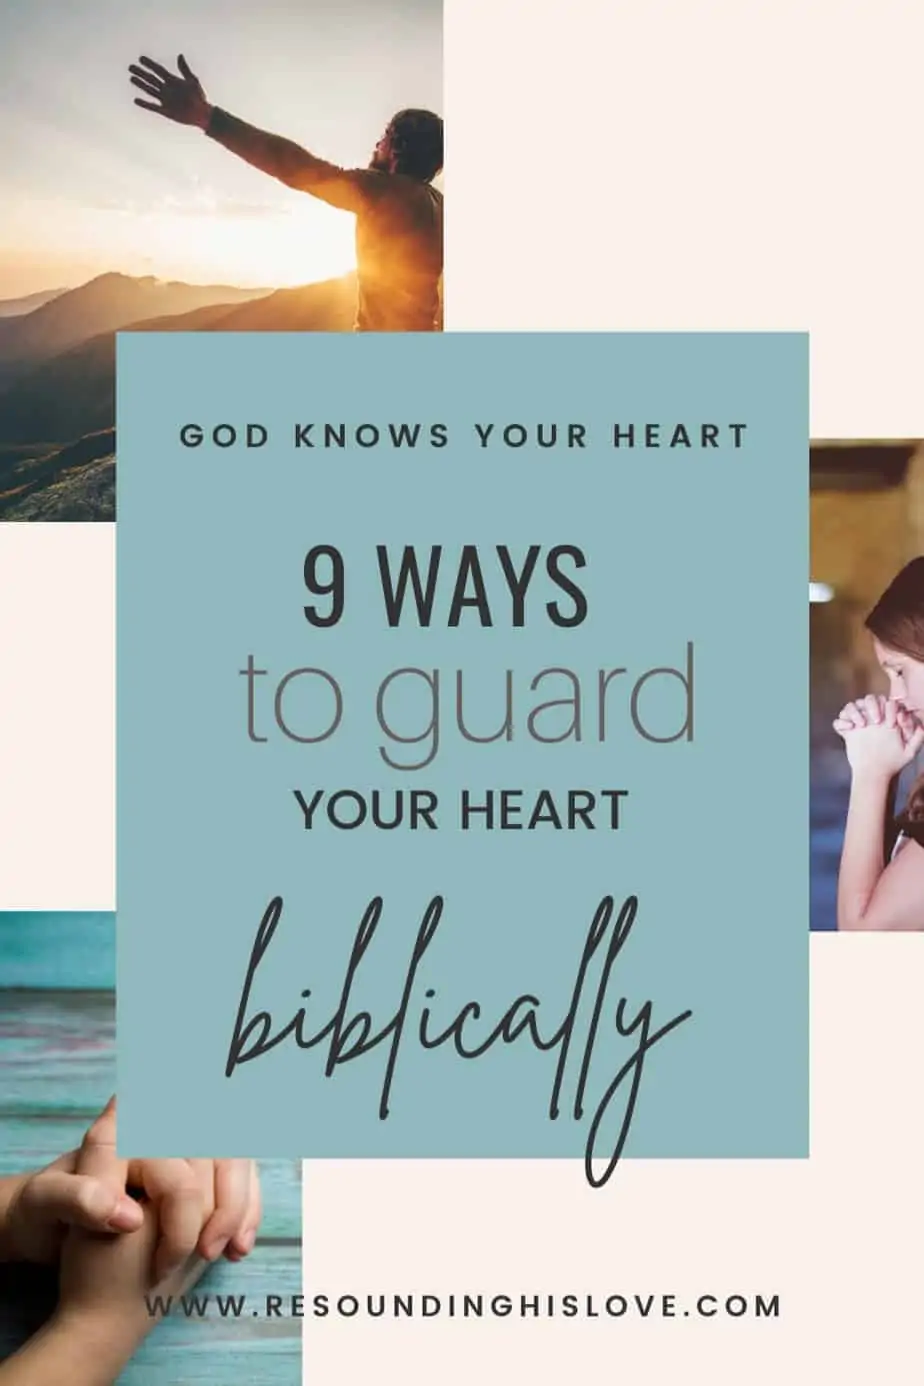 hands folded laying on a blue table, a man with arms raised sitting on a mountain, a young woman sitting in a field with hands crossed in prayer with the text God Knows Your Heart 9 Ways to Guard Your Heart Biblically